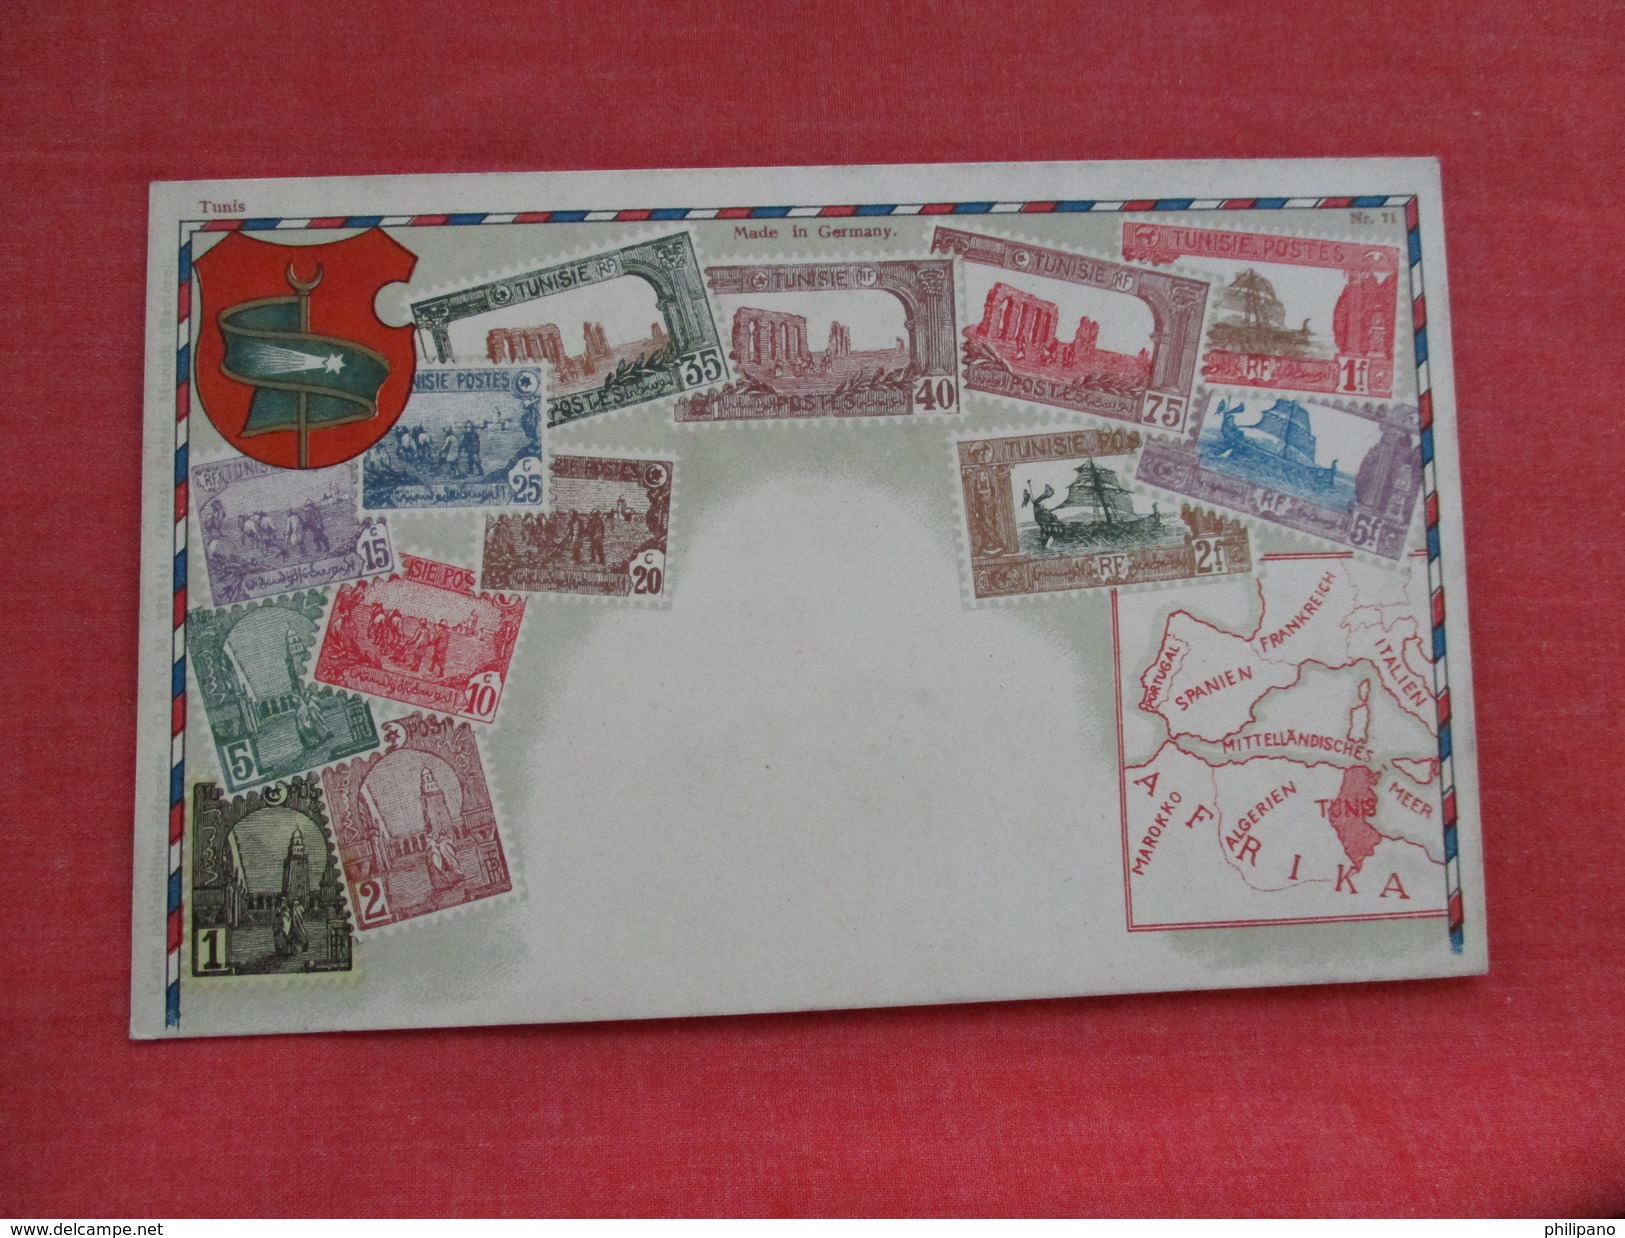 Tunis    Stamps -- Paper Residue Back     Ref 2765 - Stamps (pictures)